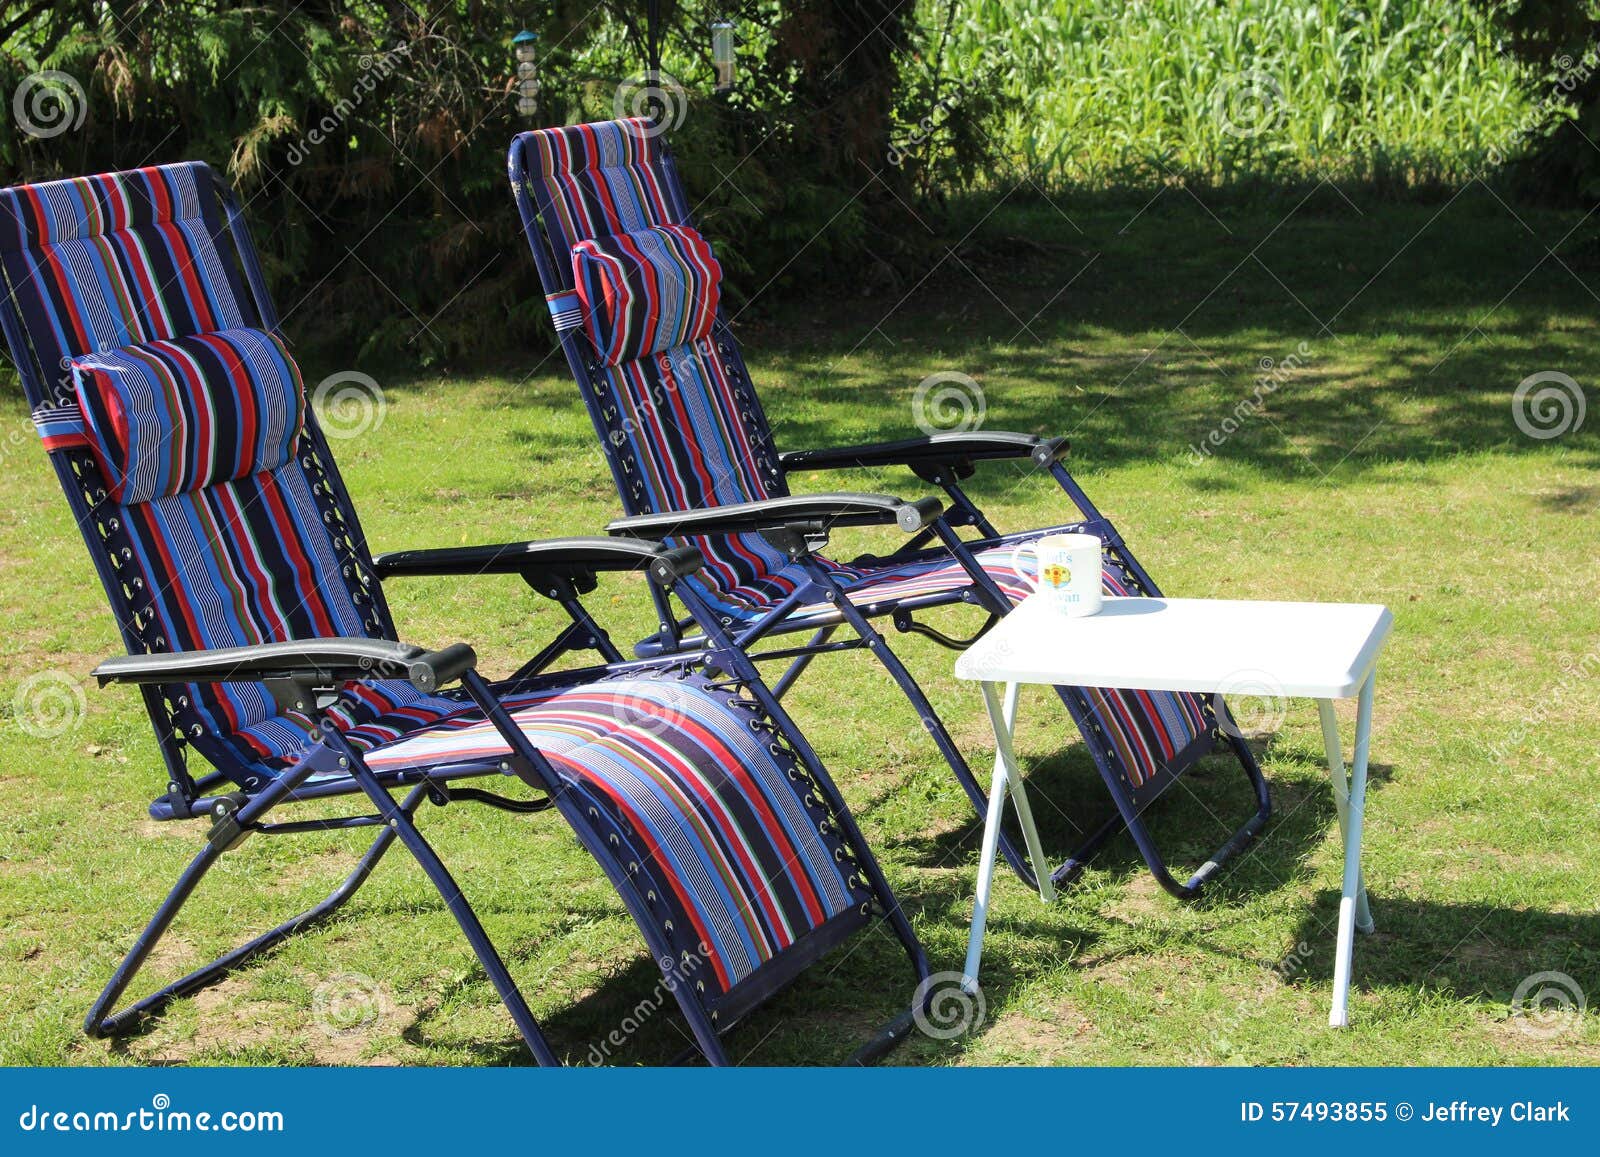 Deck Chairs Table Picture Sun 57493855 